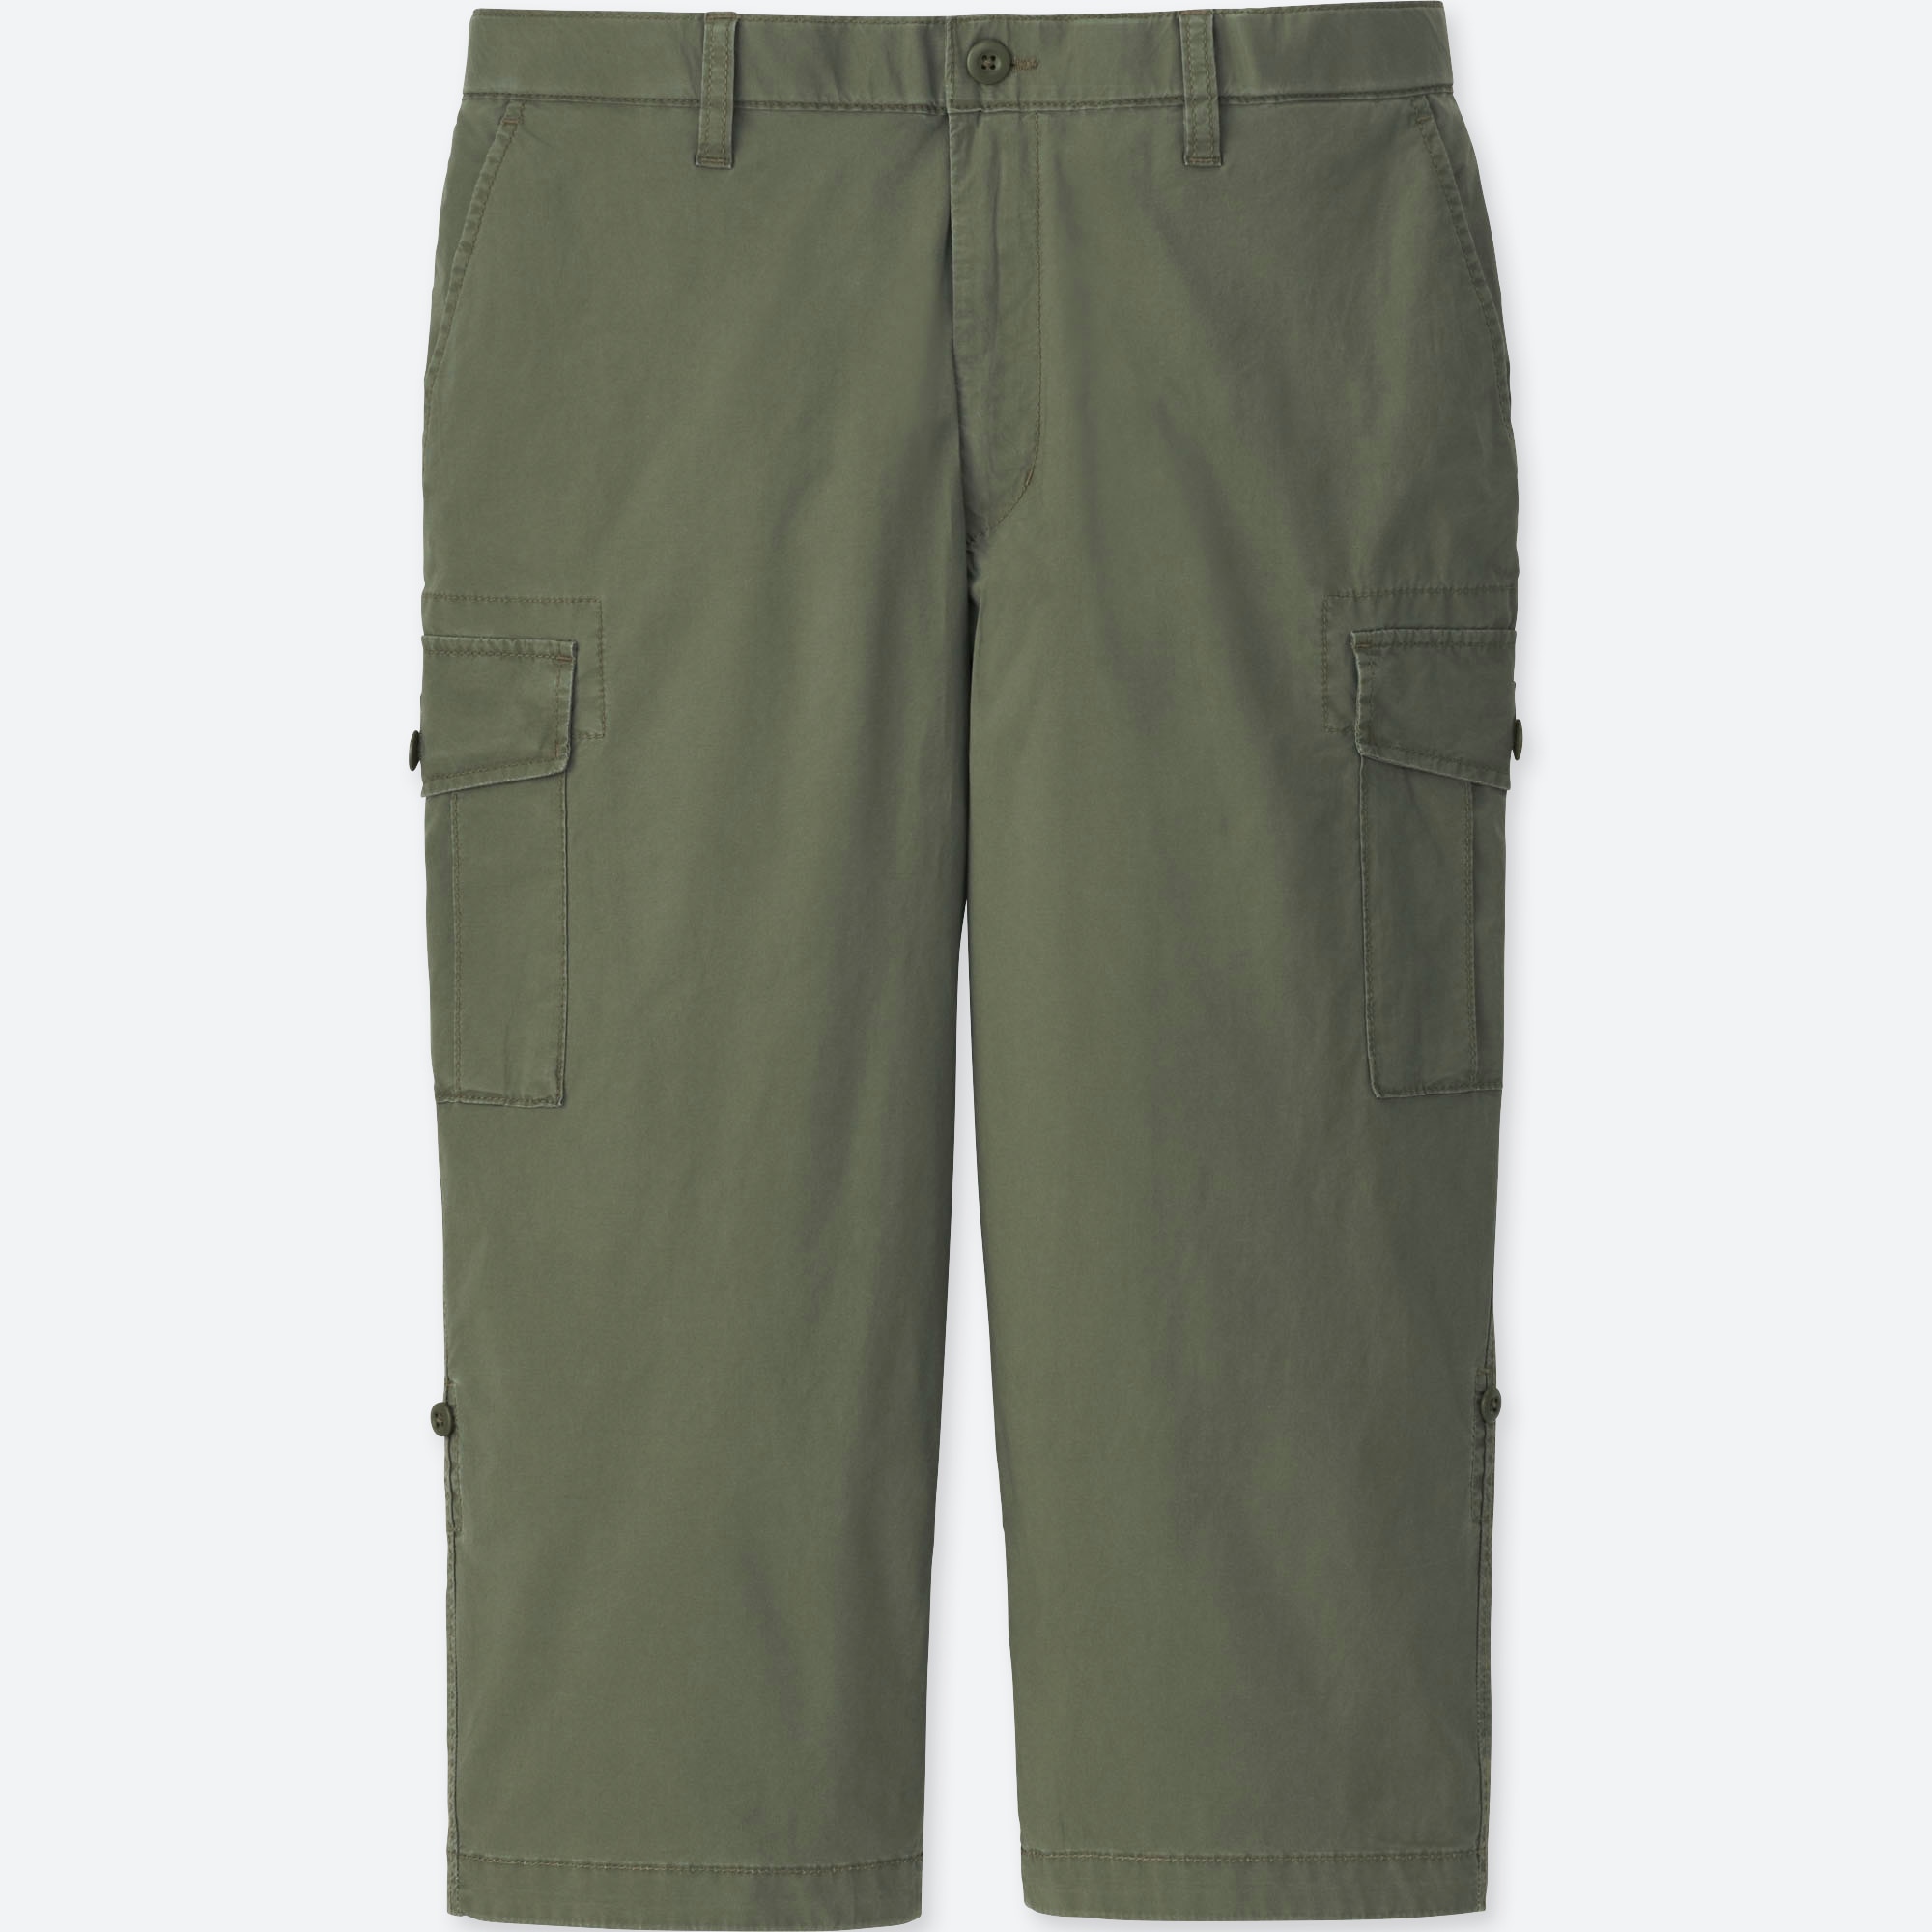 3 4th cargo pants for mens